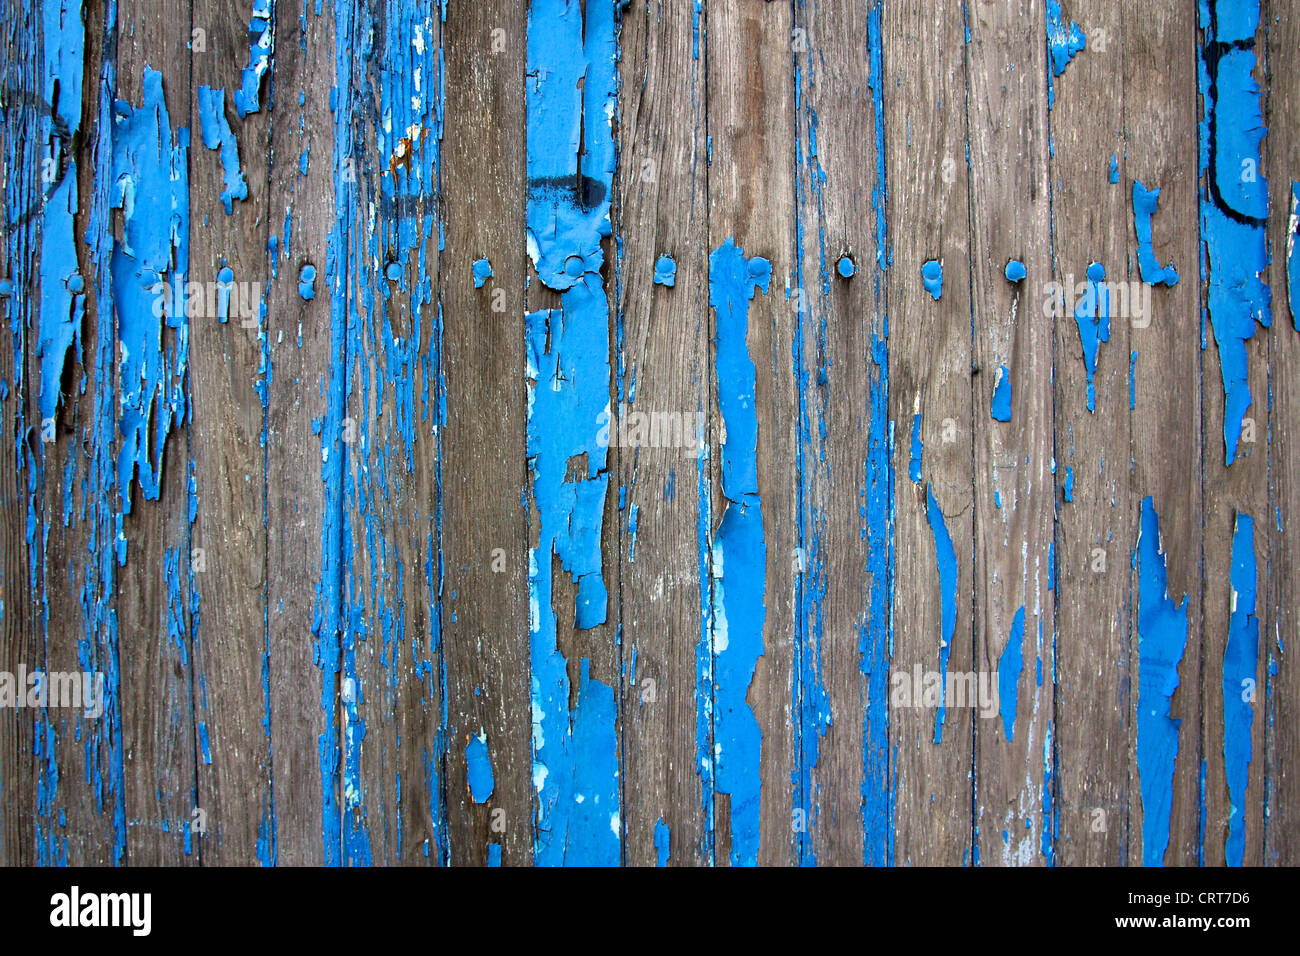 Detail on a weathered wooden shed, remnants of vibrant blue paint flaking from the decaying wood. Stock Photo